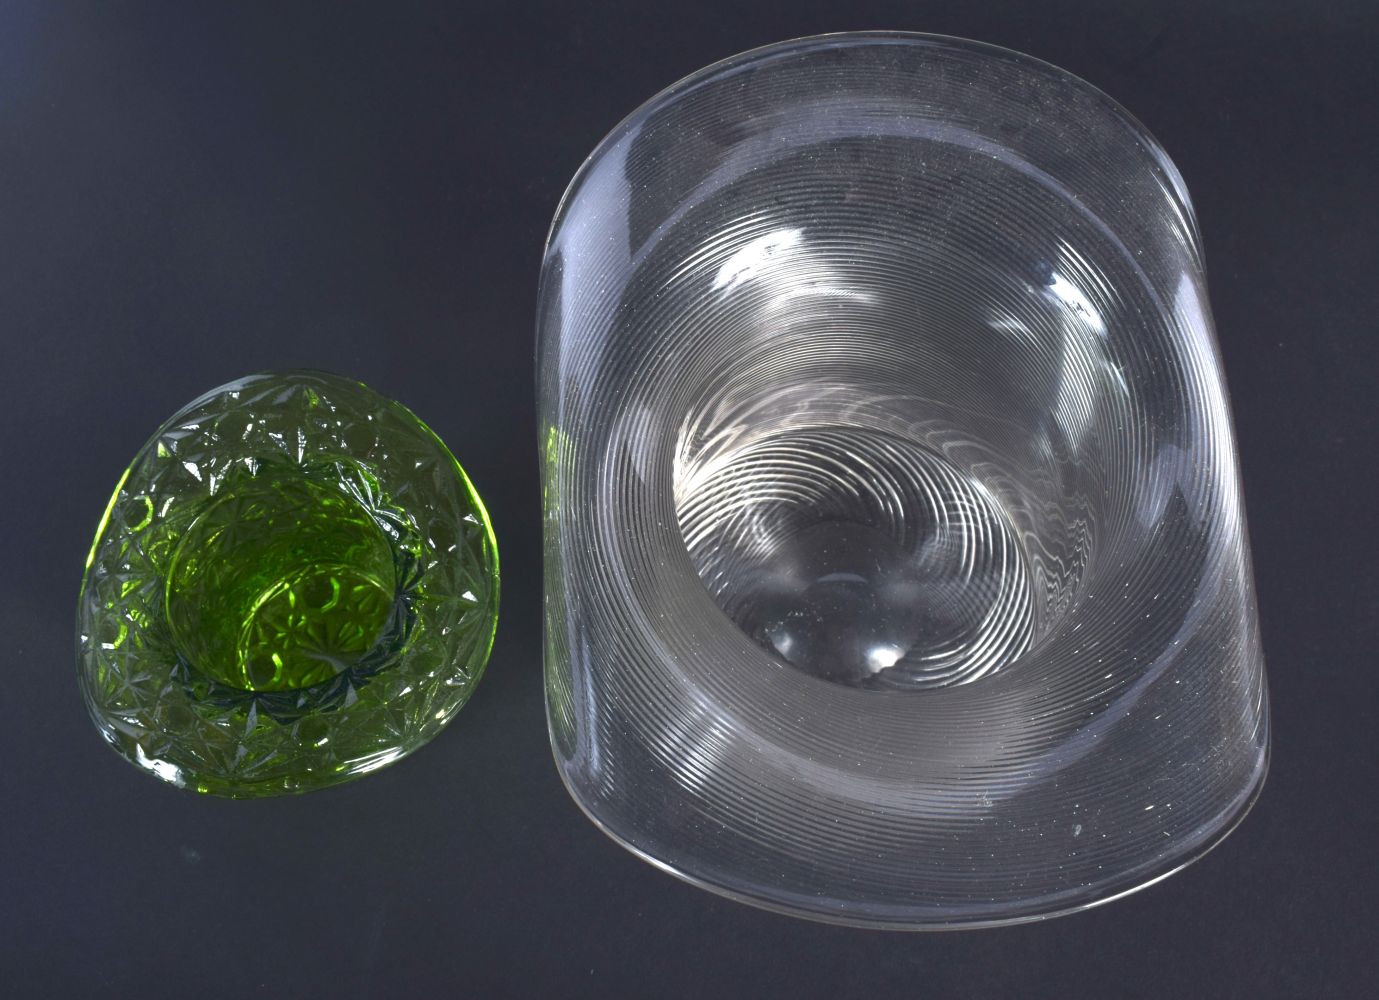 TWO ANTIQUE GLASS UPTURNED TOP HATS. 12 cm x 12 cm. - Image 3 of 4